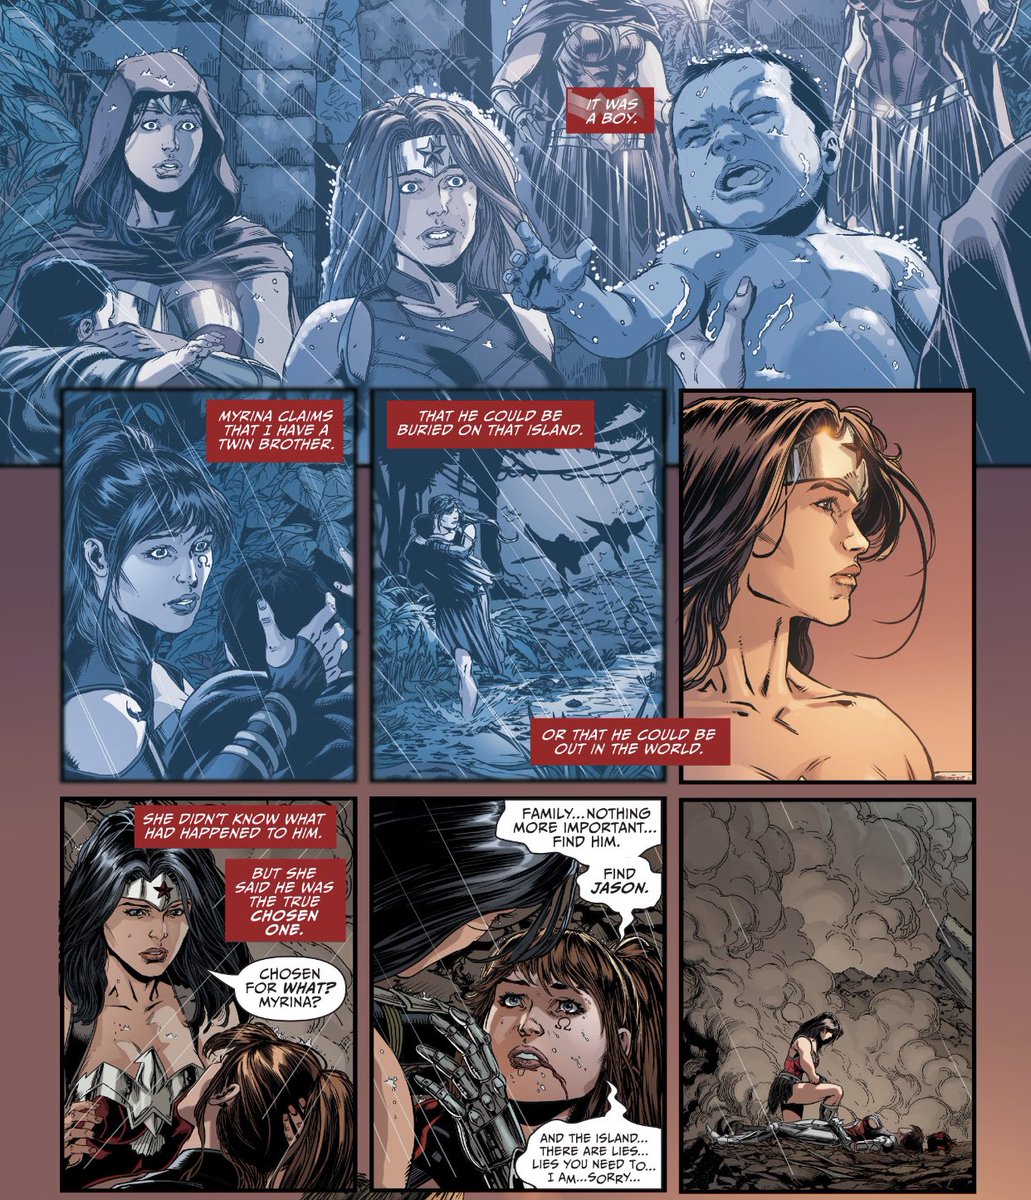 If we’re going to double down on the Zeus origin story, might as well make it double or nothing. I like the idea of Diana having a brother, and having read through that arc I love Jason very, very much. So yeah, loved this moment. Didn’t see it coming.